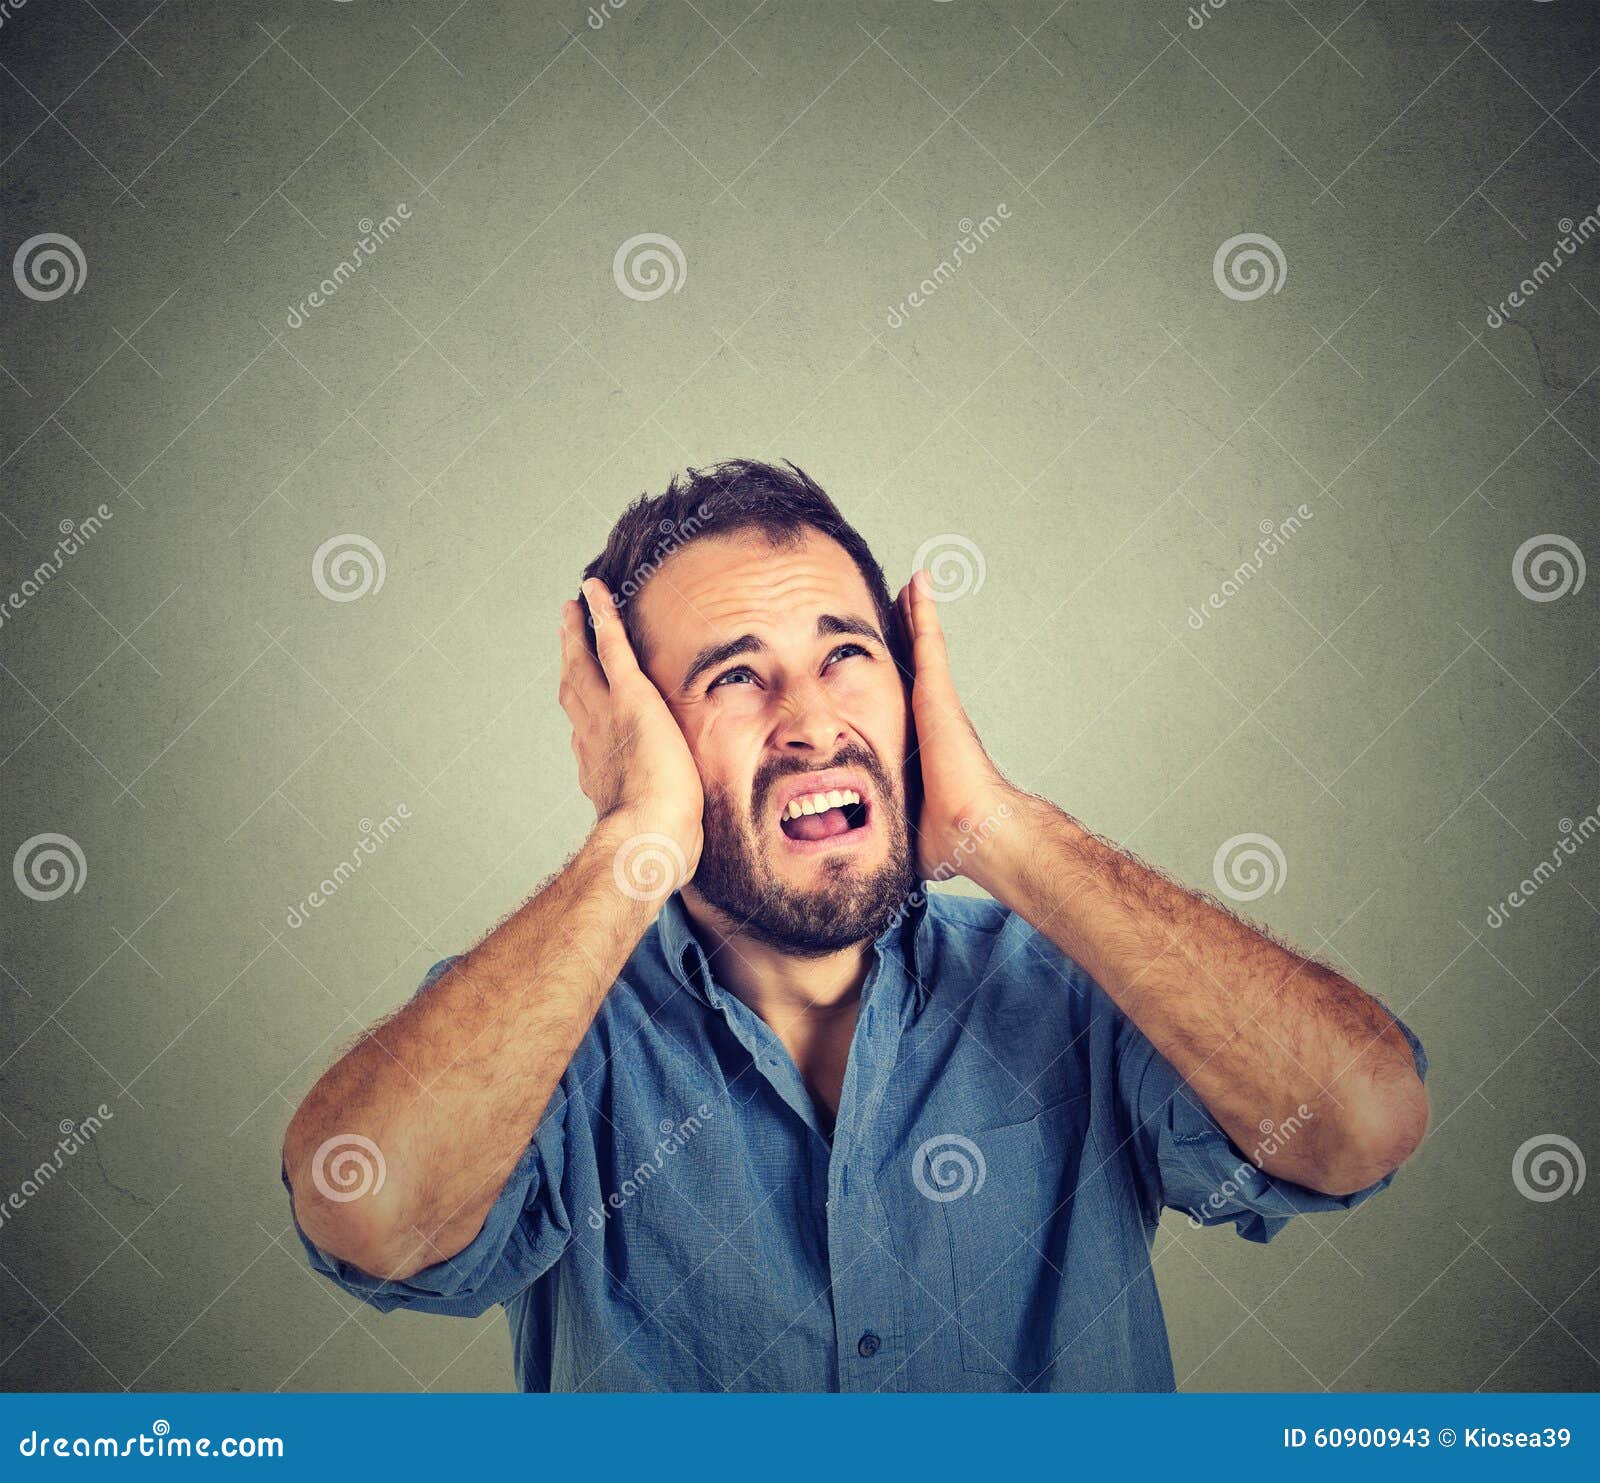 annoyed, stressed man covering his ears, looking up, stop making loud noise